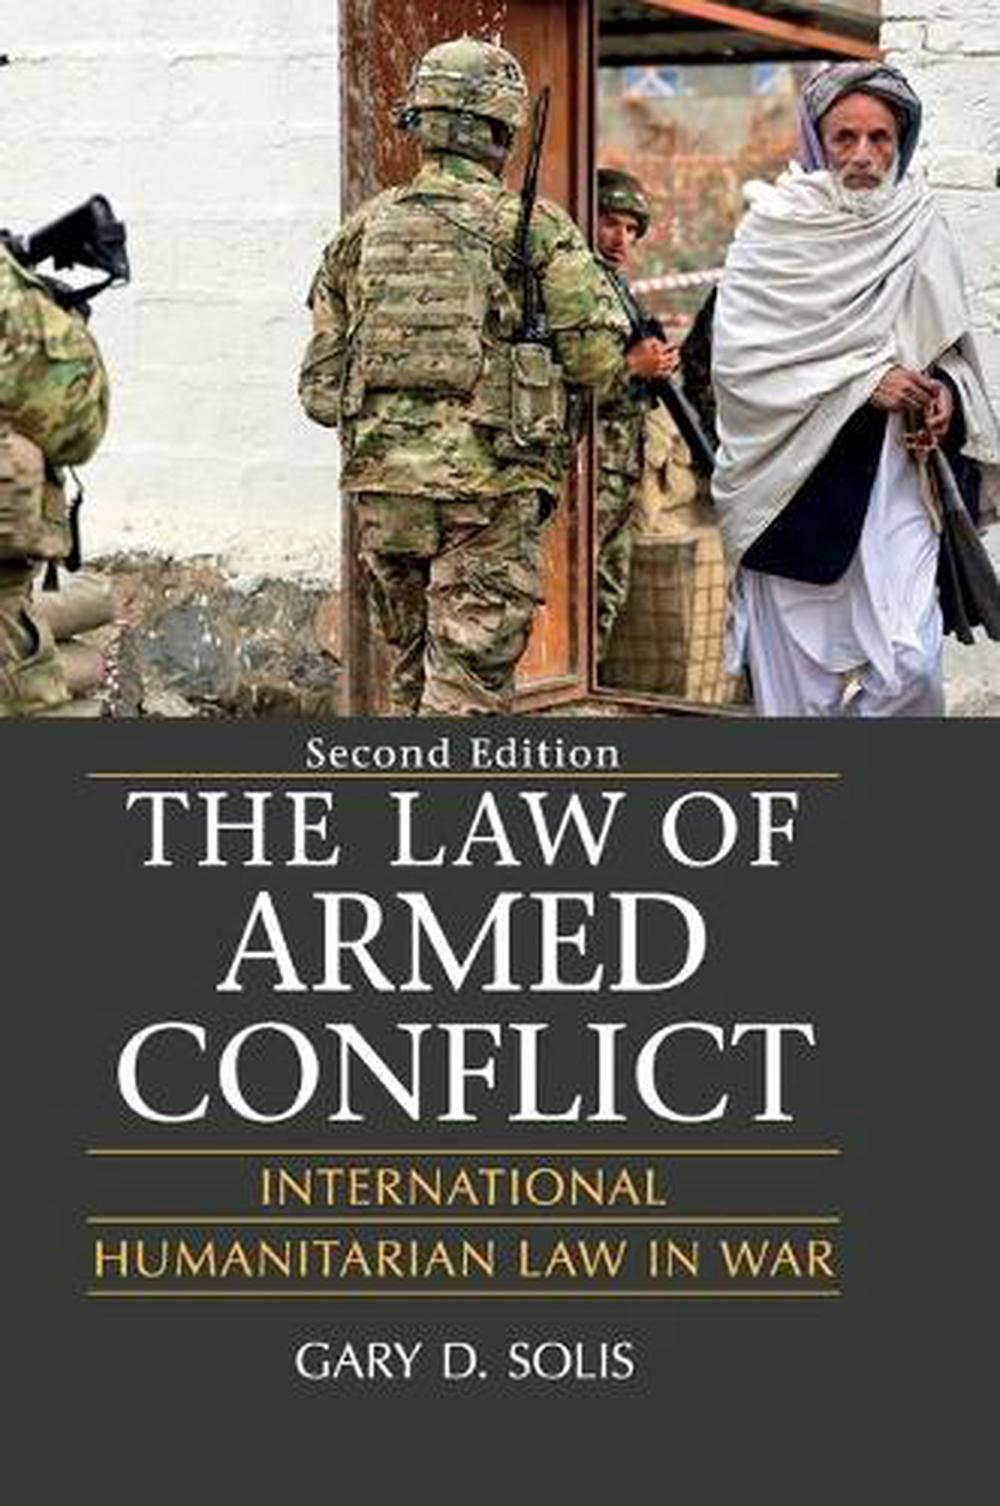 gary solis, law of armed conflict: international humanitarian law